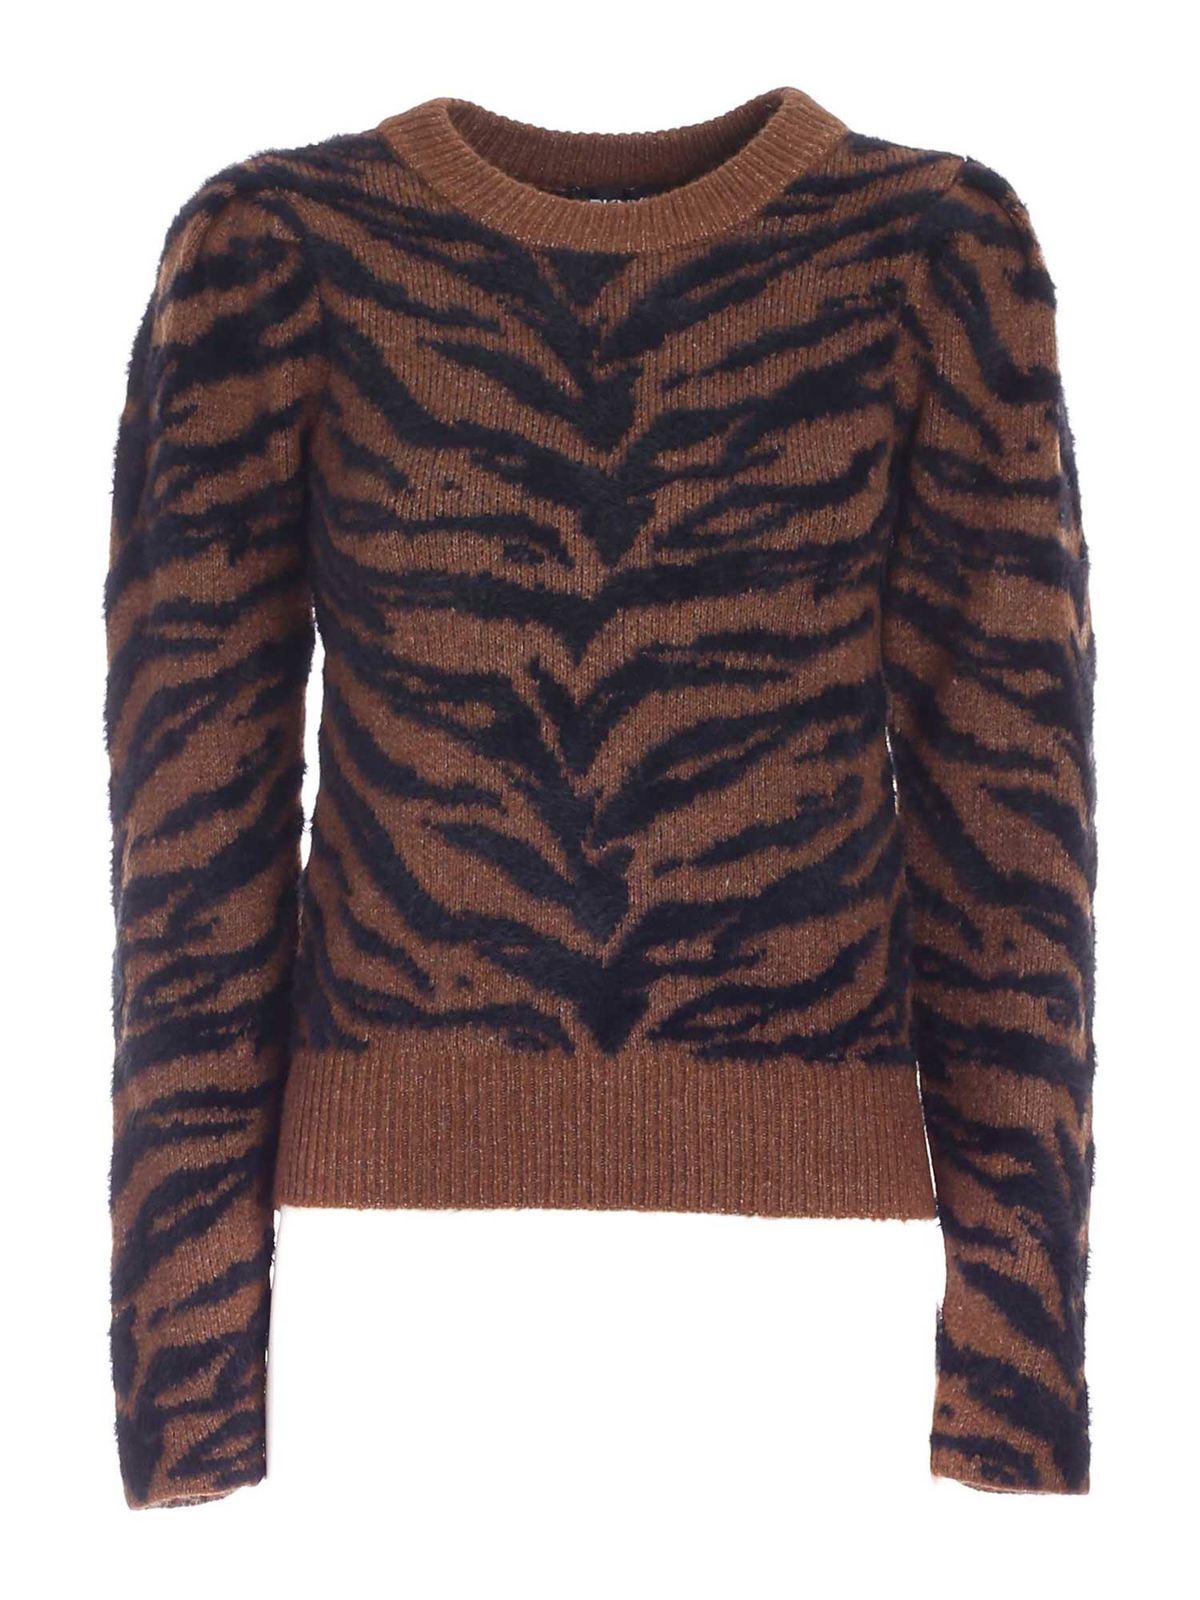 Dkny Striped Jumper In Brown And Black In Animal Print